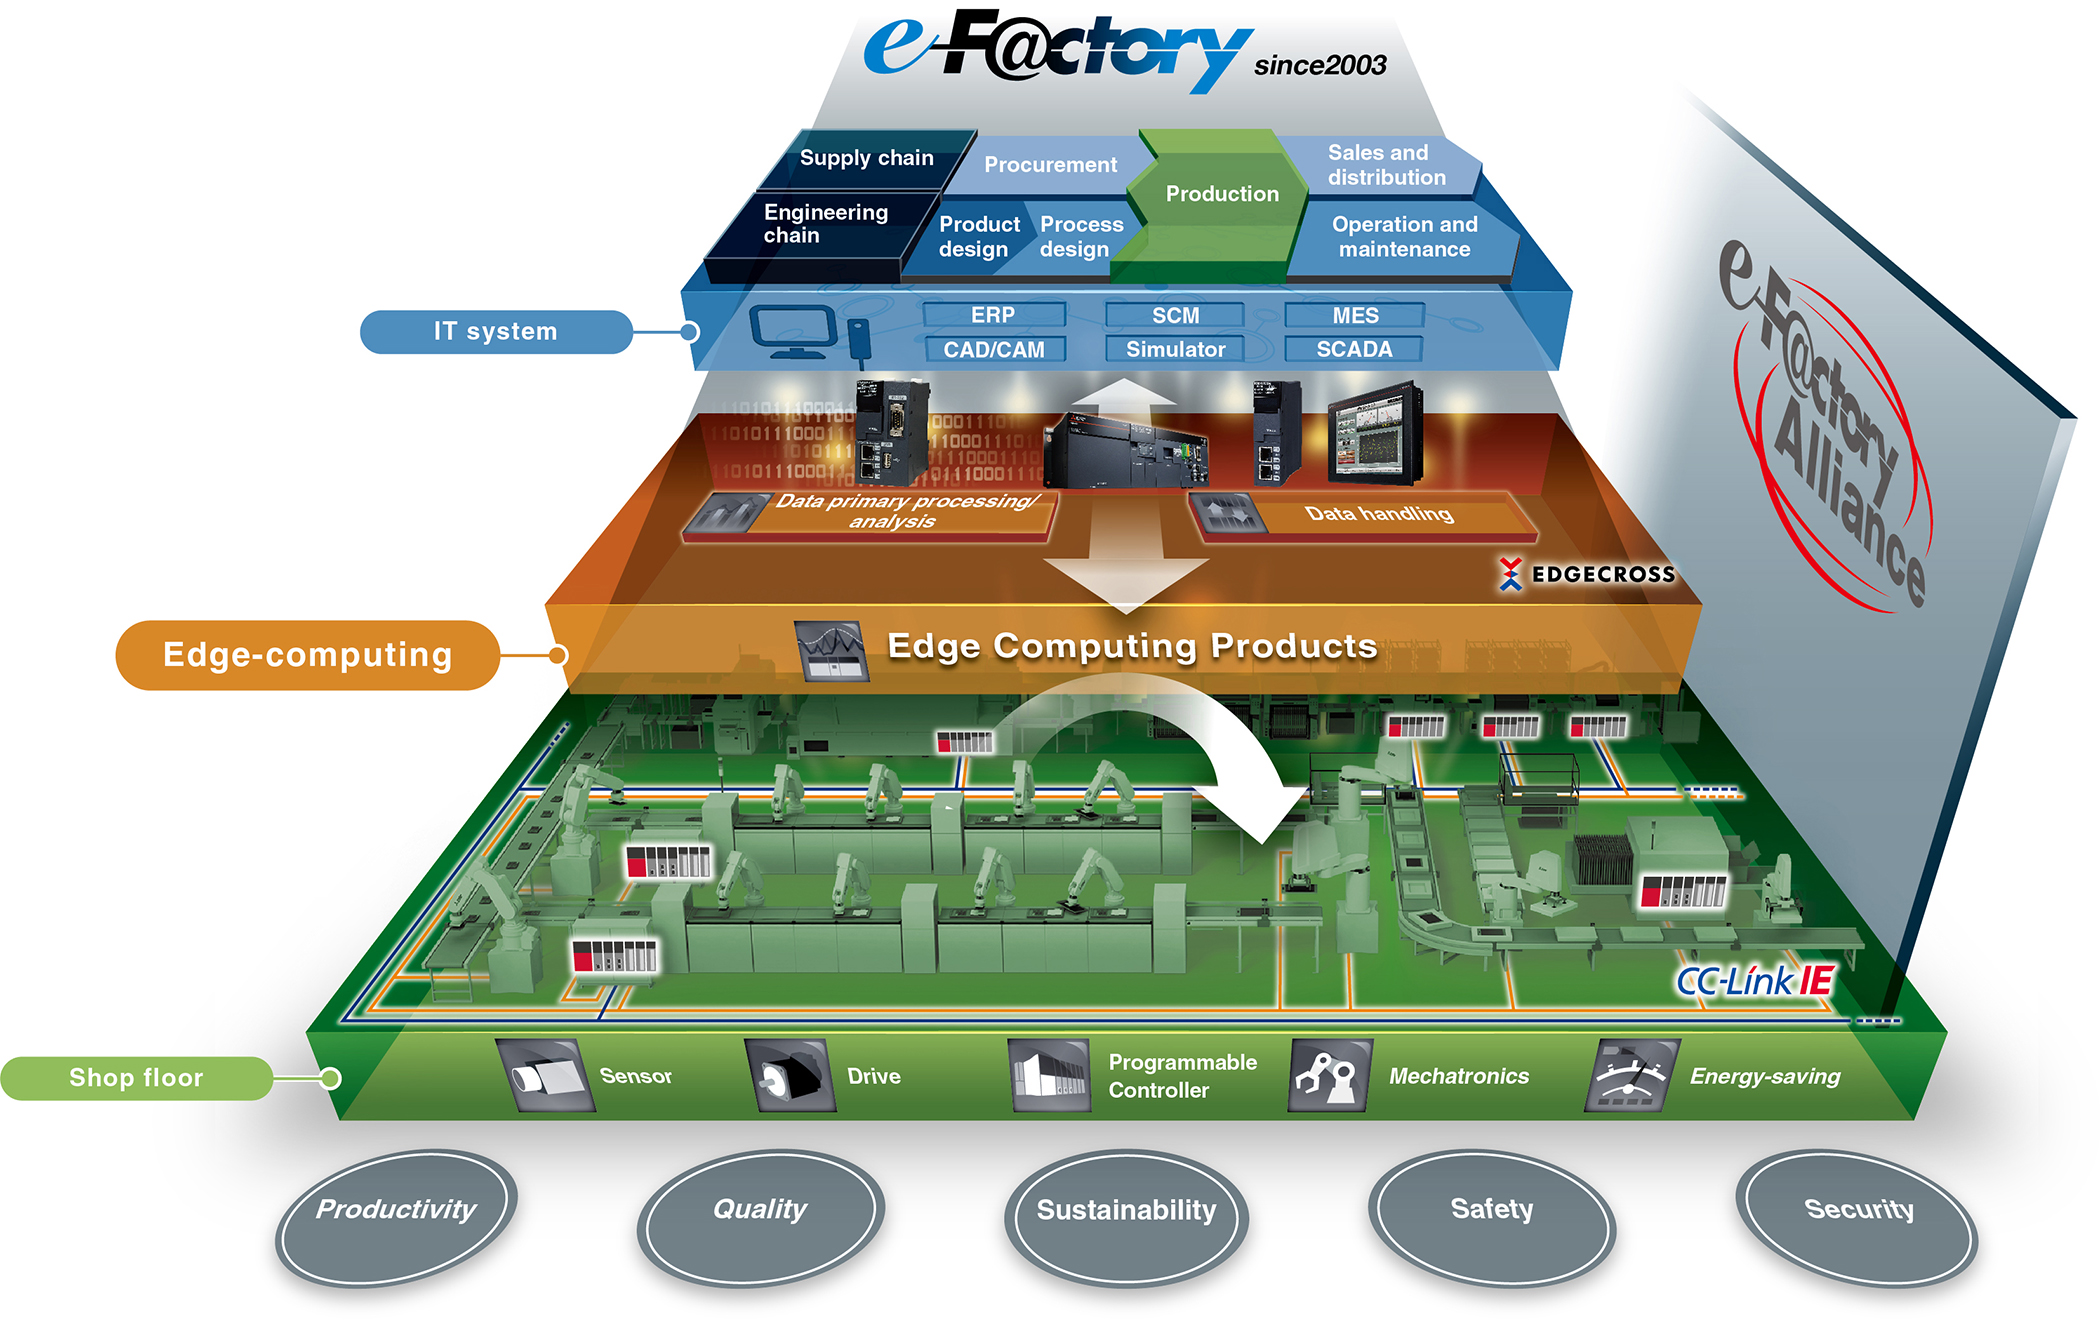 The e-F@ctory Alliance brings together over 900 manufacturers of industrial components, specialist system integrators and software providers, which have introduced more than 20,000 systems.